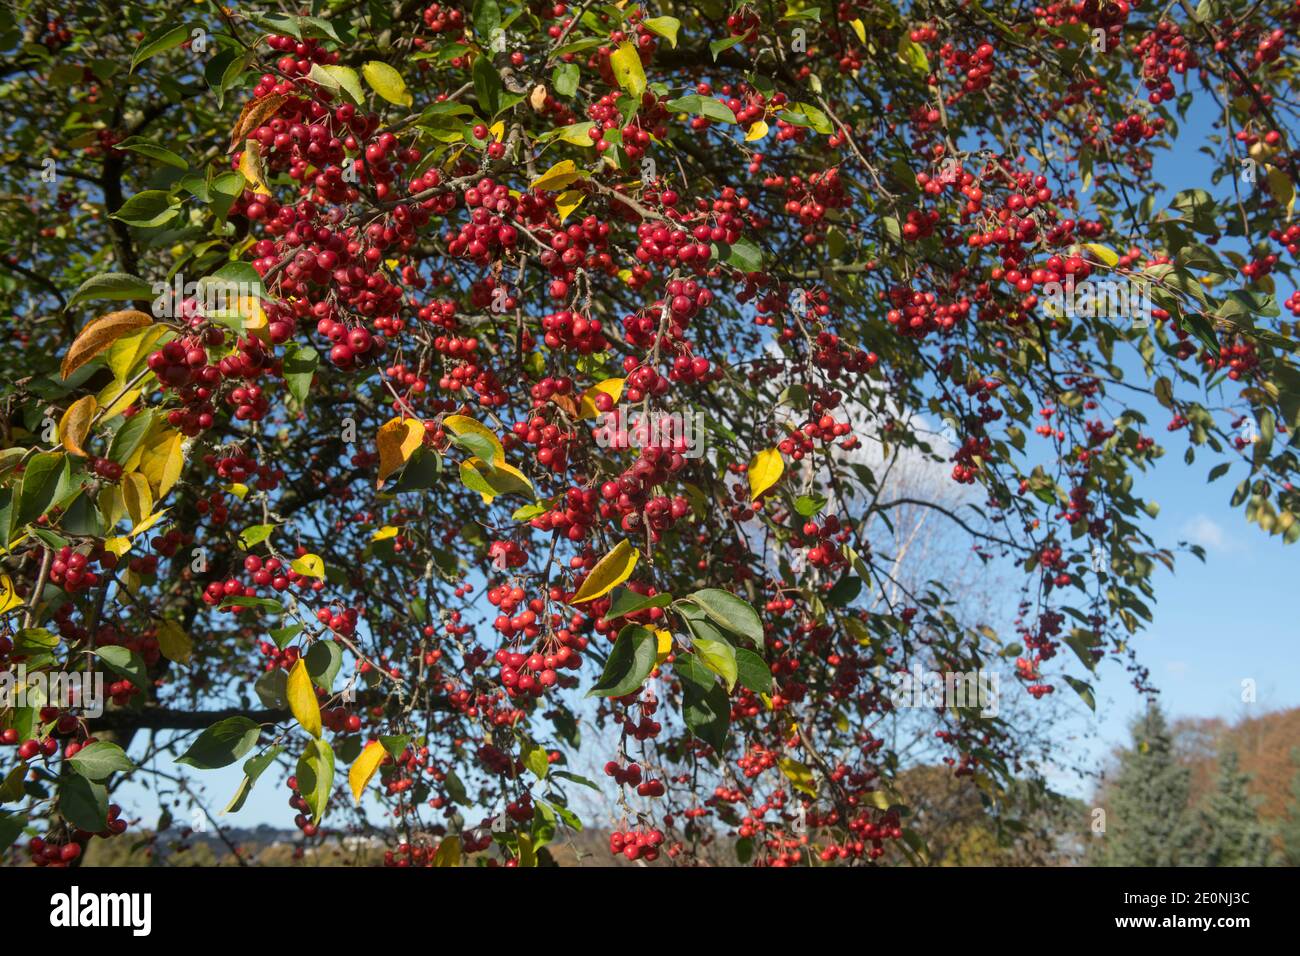 Bright Red Autumn Fruit and Green Leaves on a Crab Apple Tree (Malus baccata var. mandshurica) Growing in a Garden in Rural Devon, England, UK Stock Photo